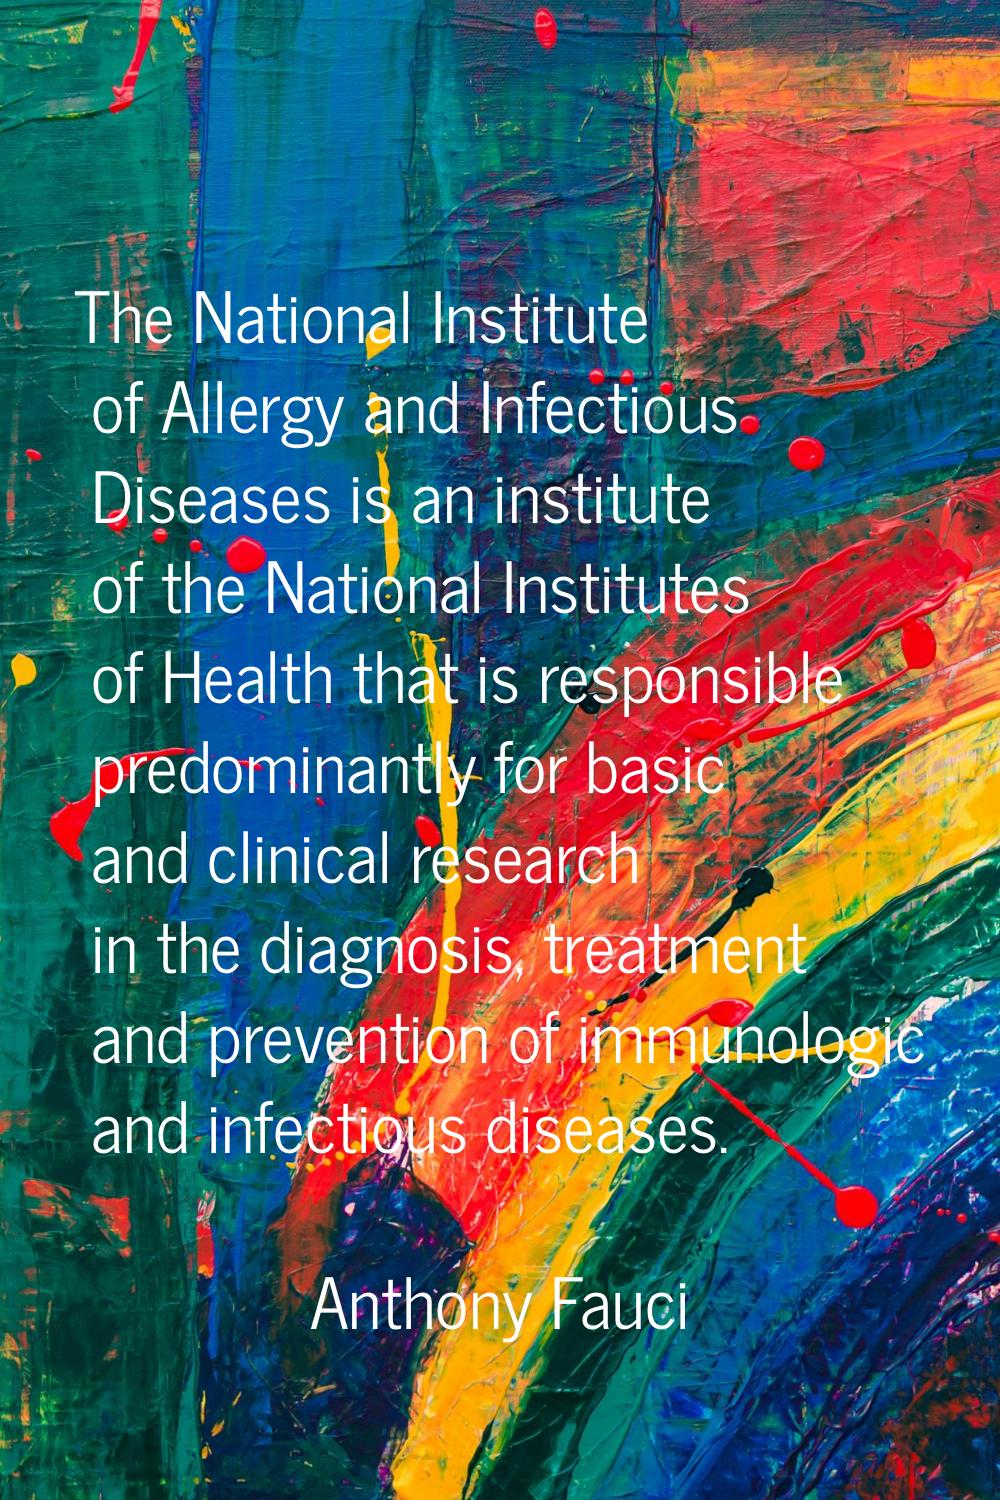 The National Institute of Allergy and Infectious Diseases is an institute of the National Institute